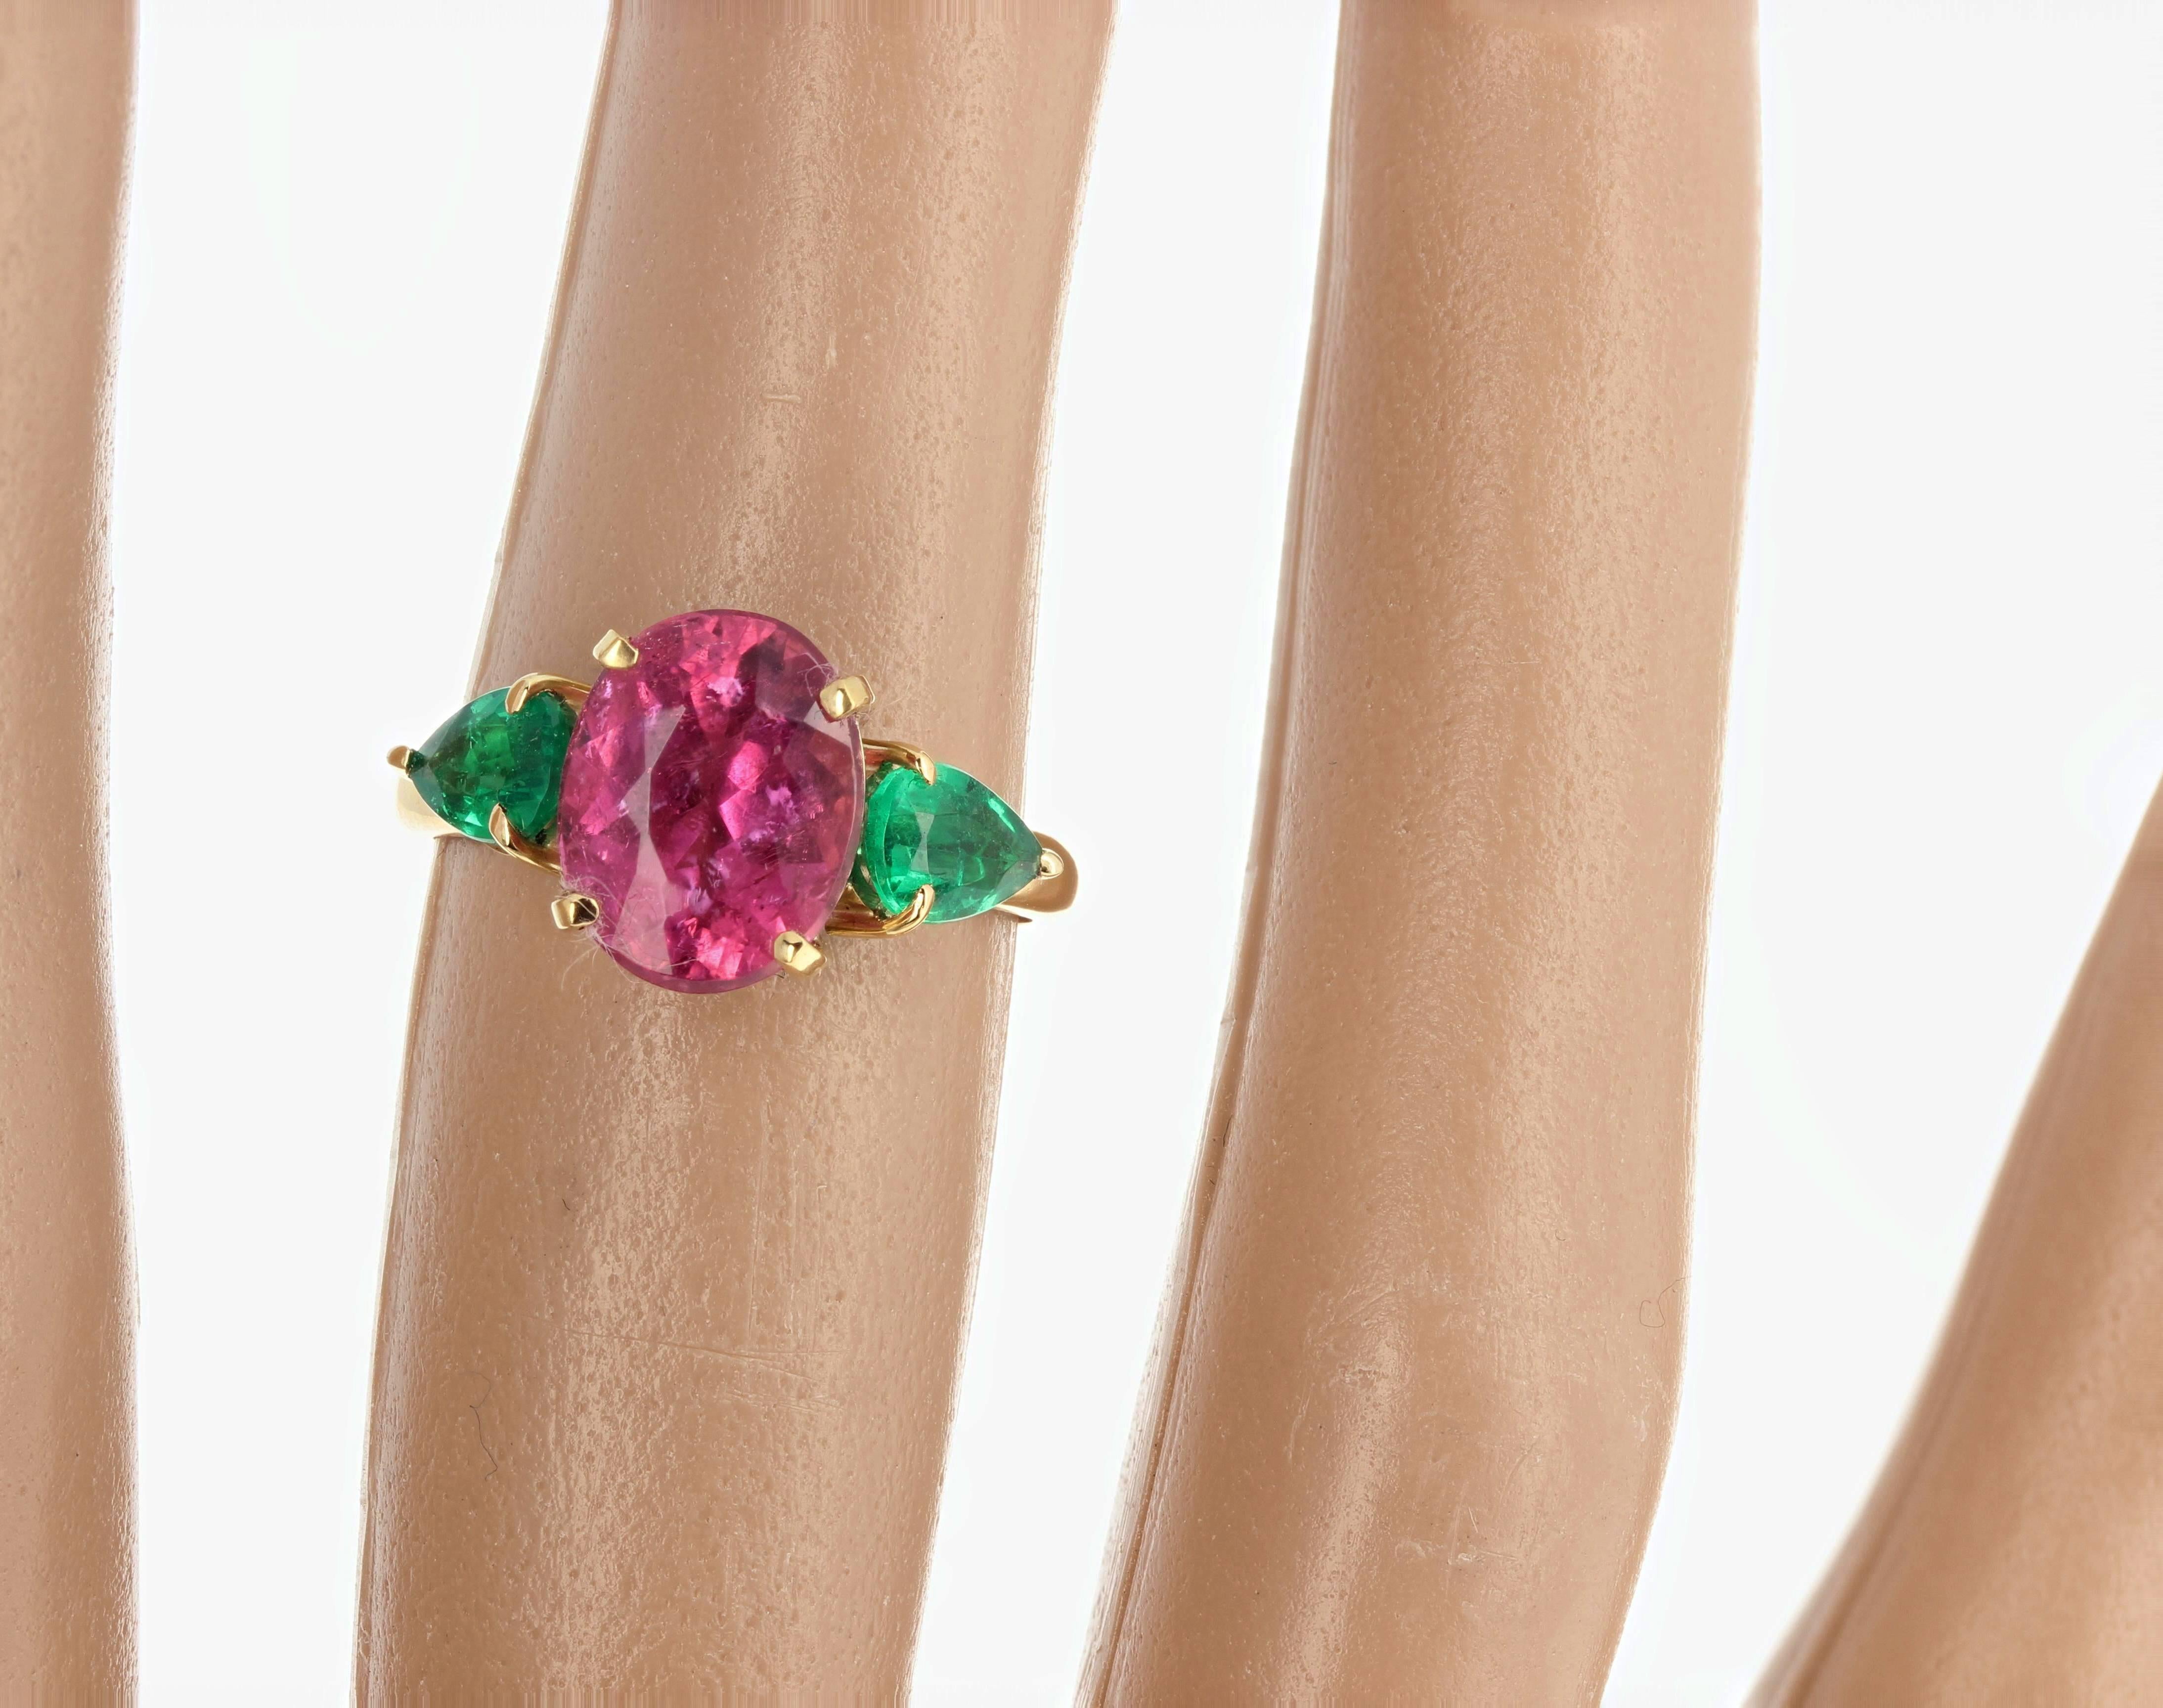 Deep brilliant pink clear 2.71 carat Tourmaline (10 mm x 8 mm) enhanced with two pear cut emerald side stones (4.5 mm x 6 mm) set in a unique handmade 18 Kt yellow gold ring size 6 (sizable).  Spectacular optical effect in the pink Tourmaline